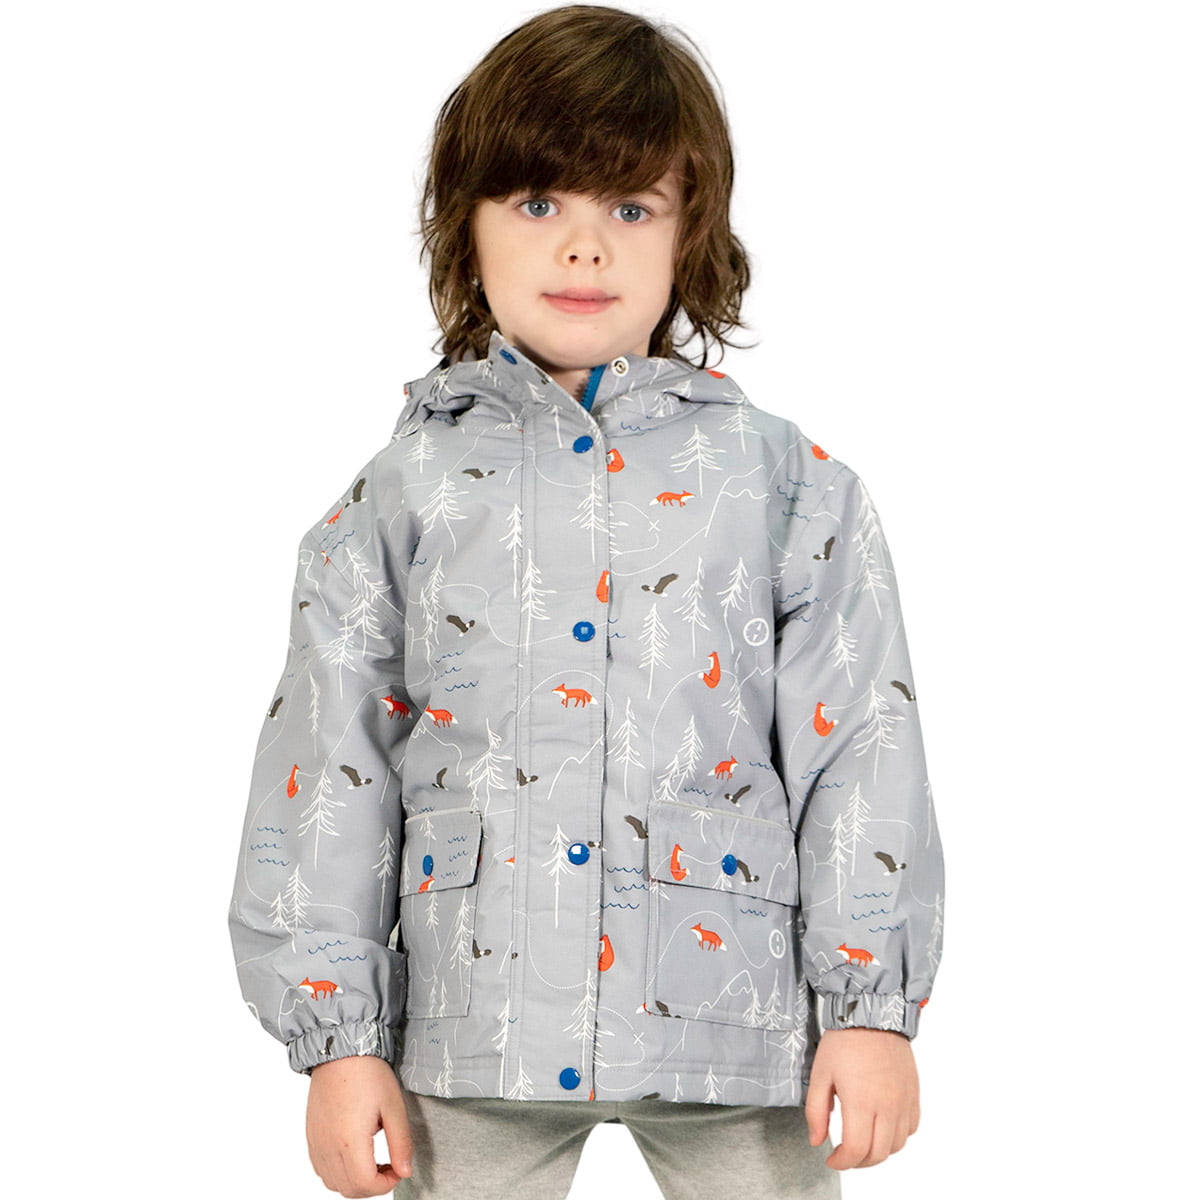 JAN /& JUL Cozy-Dry Waterproof Fleece-Lined Rain Suit One-Piece for Baby and Toddler